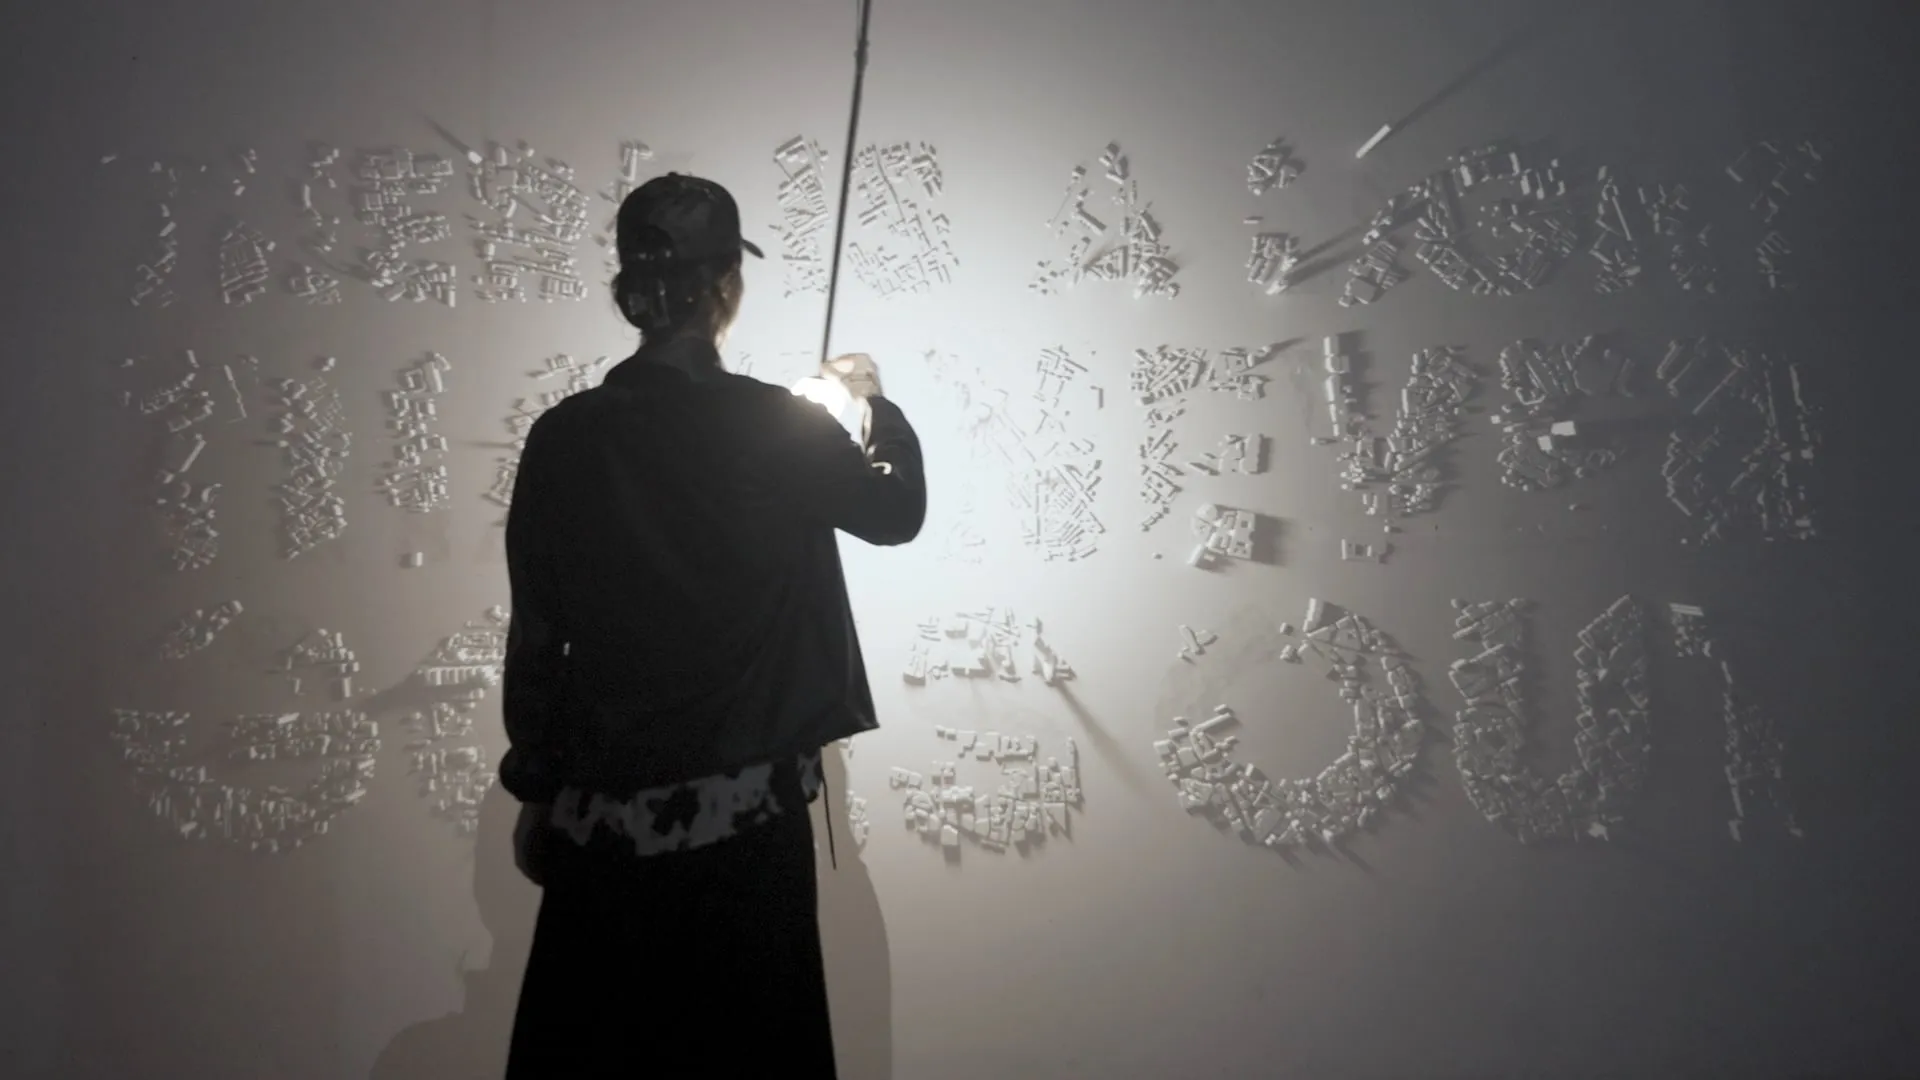 A person engages with a motion-tracked pendant lamp that controls dynamic projected shadows of letterforms, blurring digital and physical.